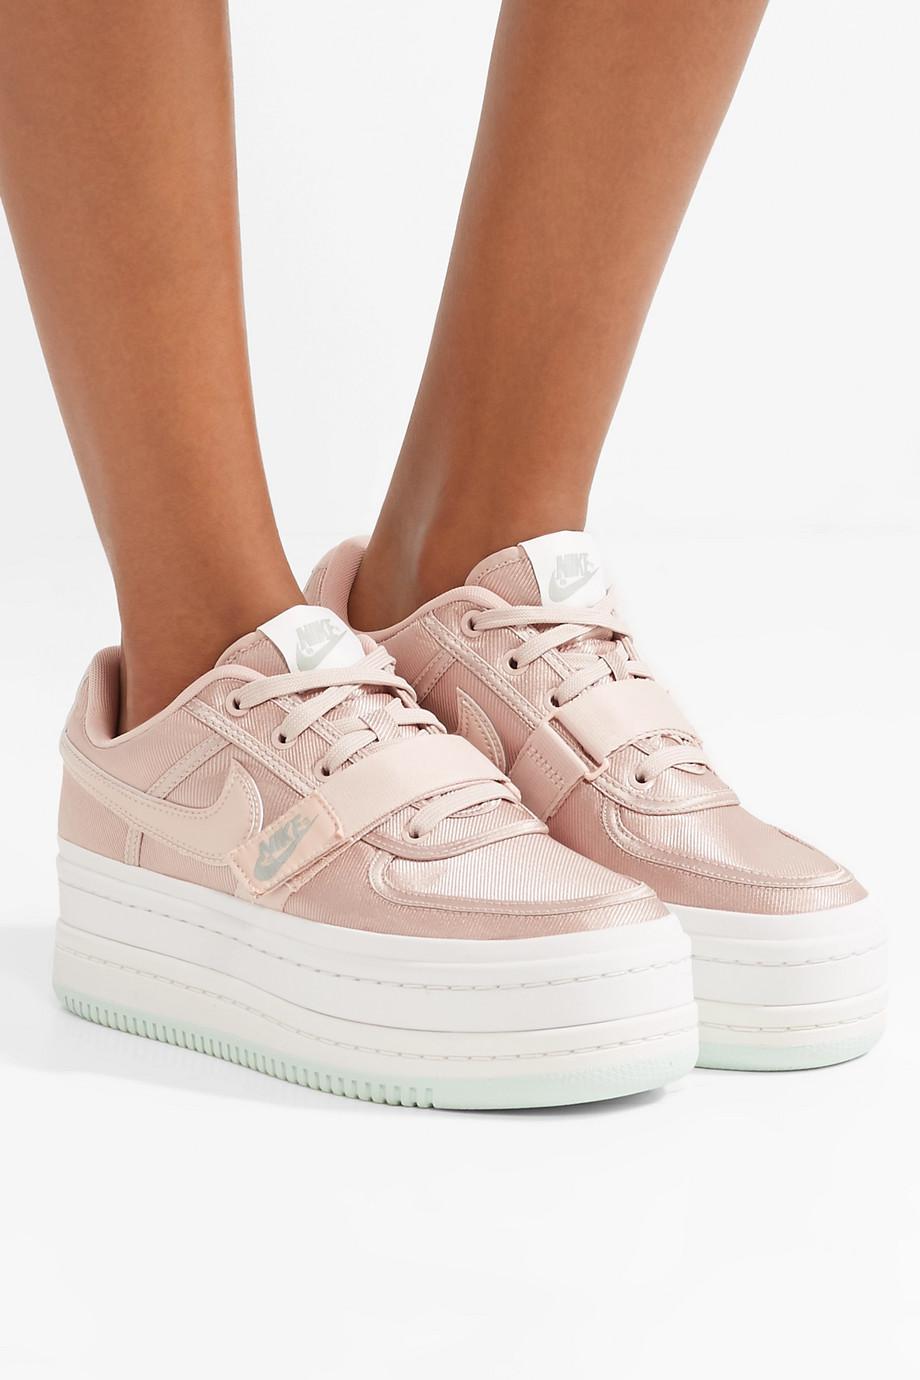 Nike Vandal Faux Leather-trimmed Metallic Faille Platform Sneakers in Pink | Lyst